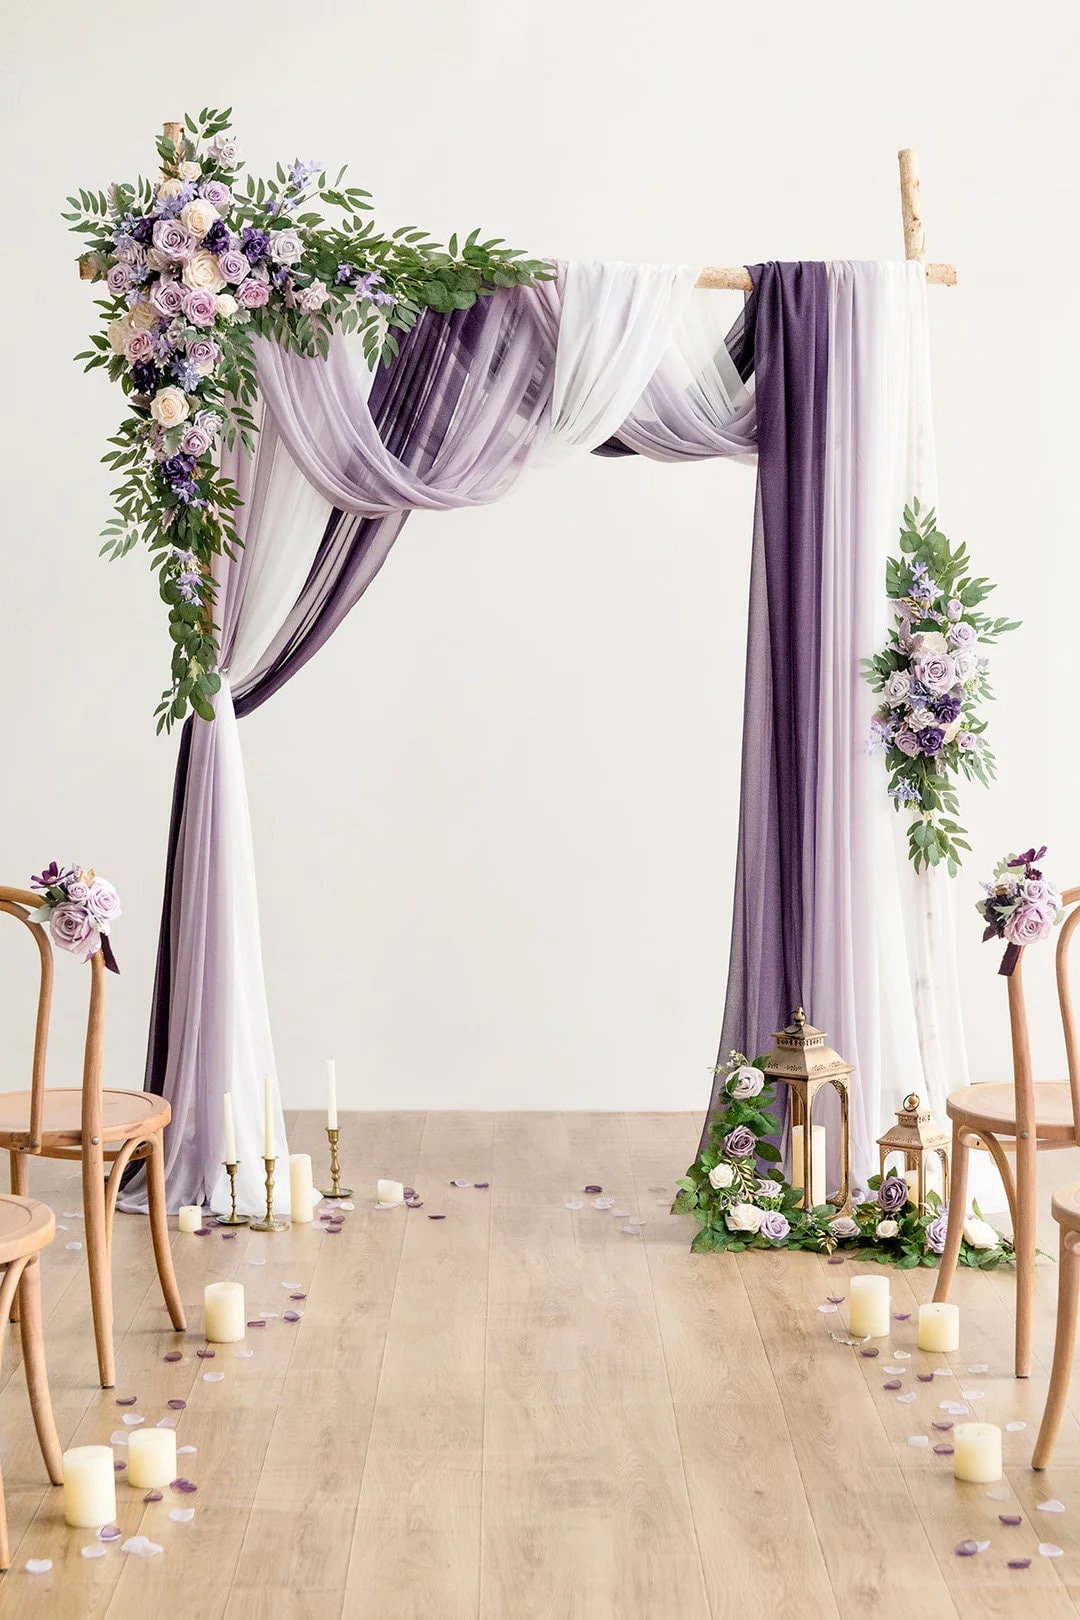 Wedding Arch Draping Fabric White Wedding Arch Drapes 2 Panels 6 Yards  Lavender